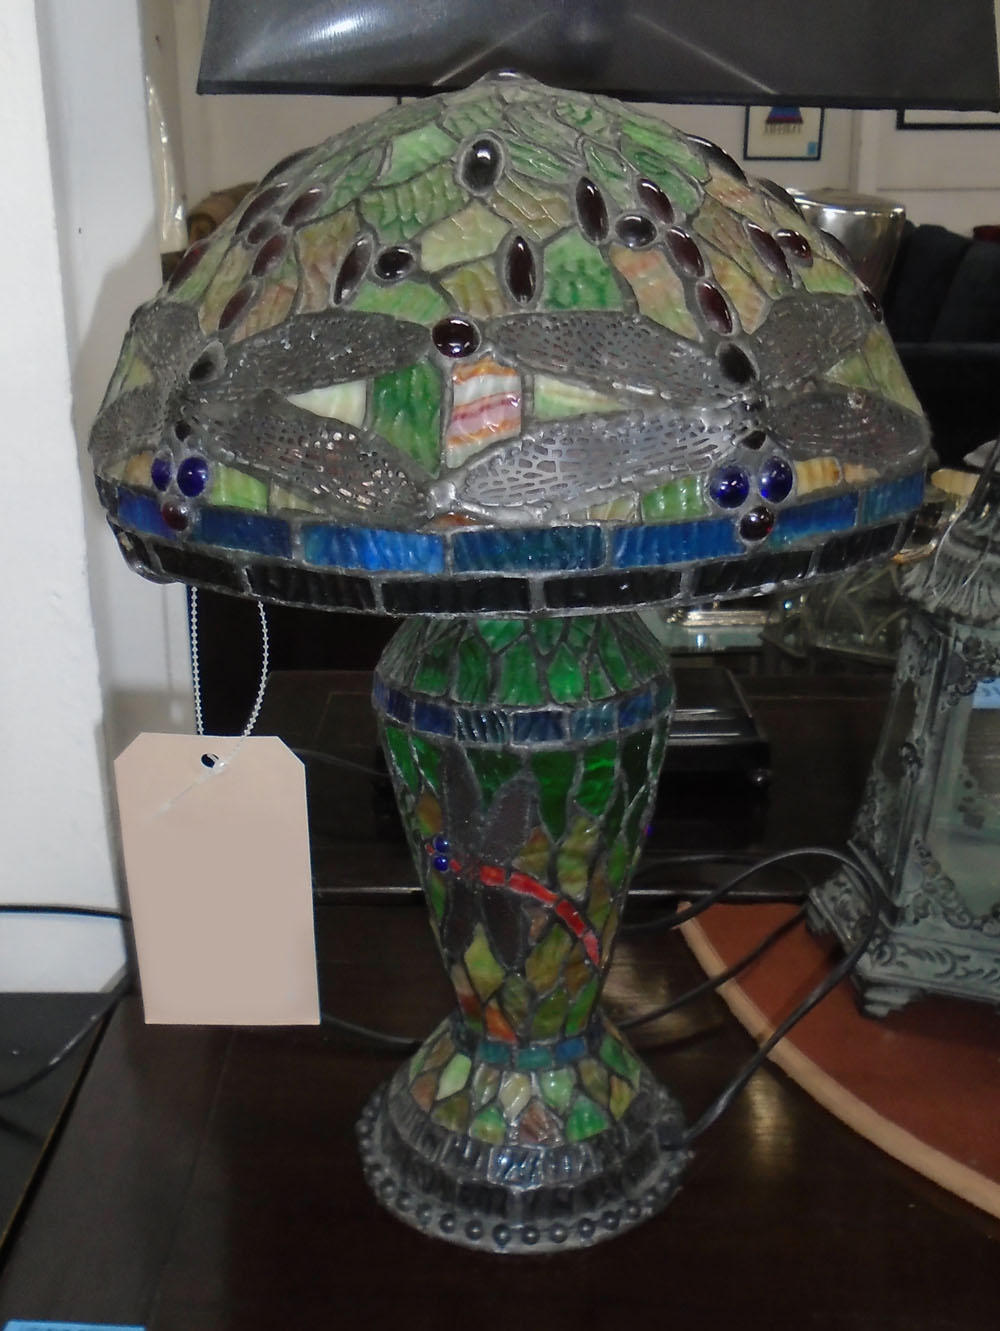 TIFFANY STYLE LAMP, having dragonfly stained glass in lead mounts, 45cm H.